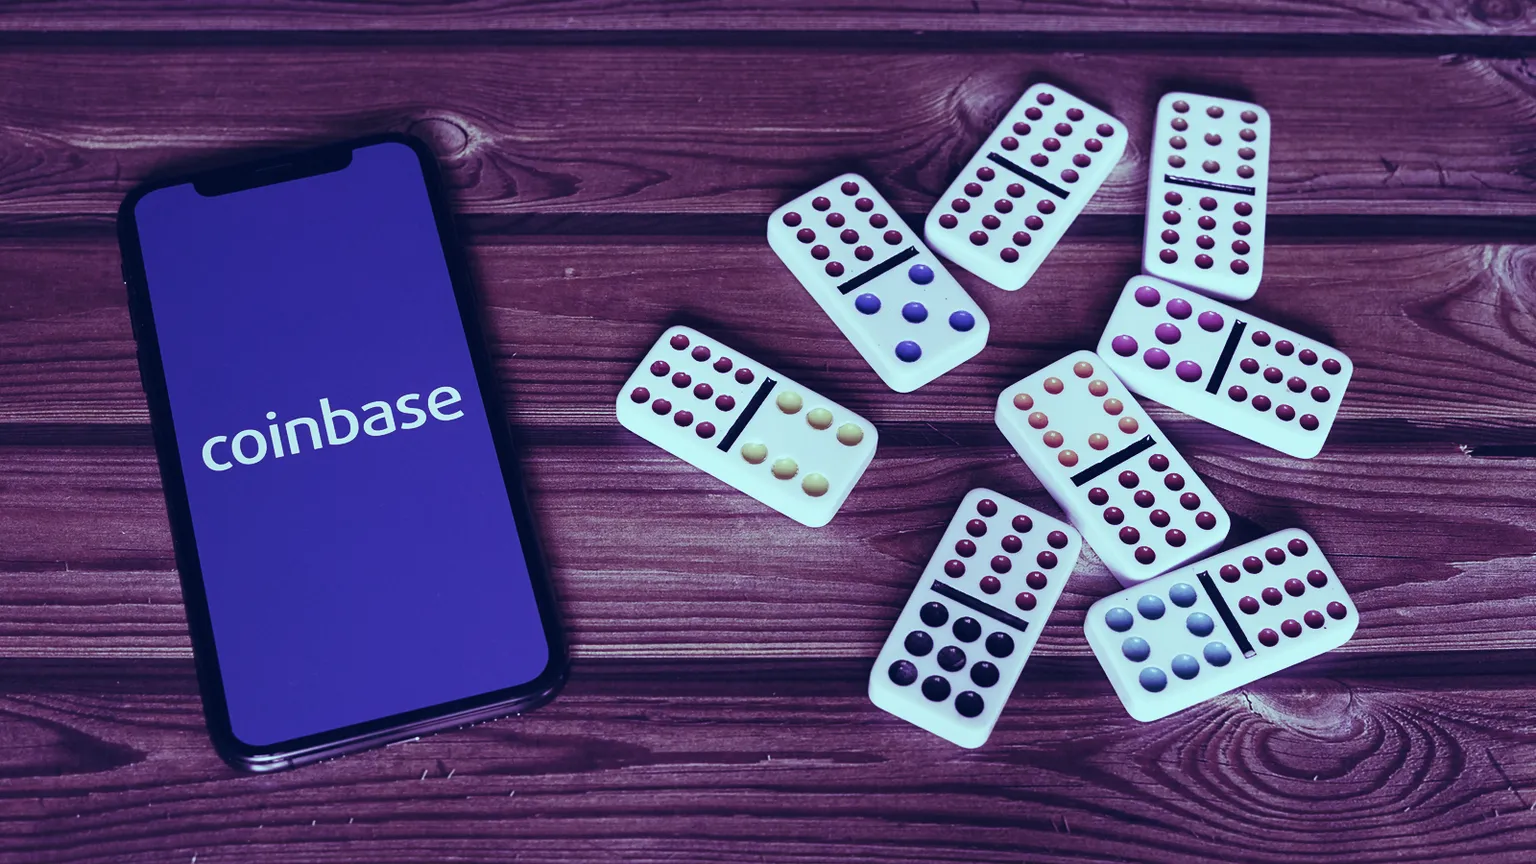 Coinbase is a leading crypto exchange. Image: Shutterstock